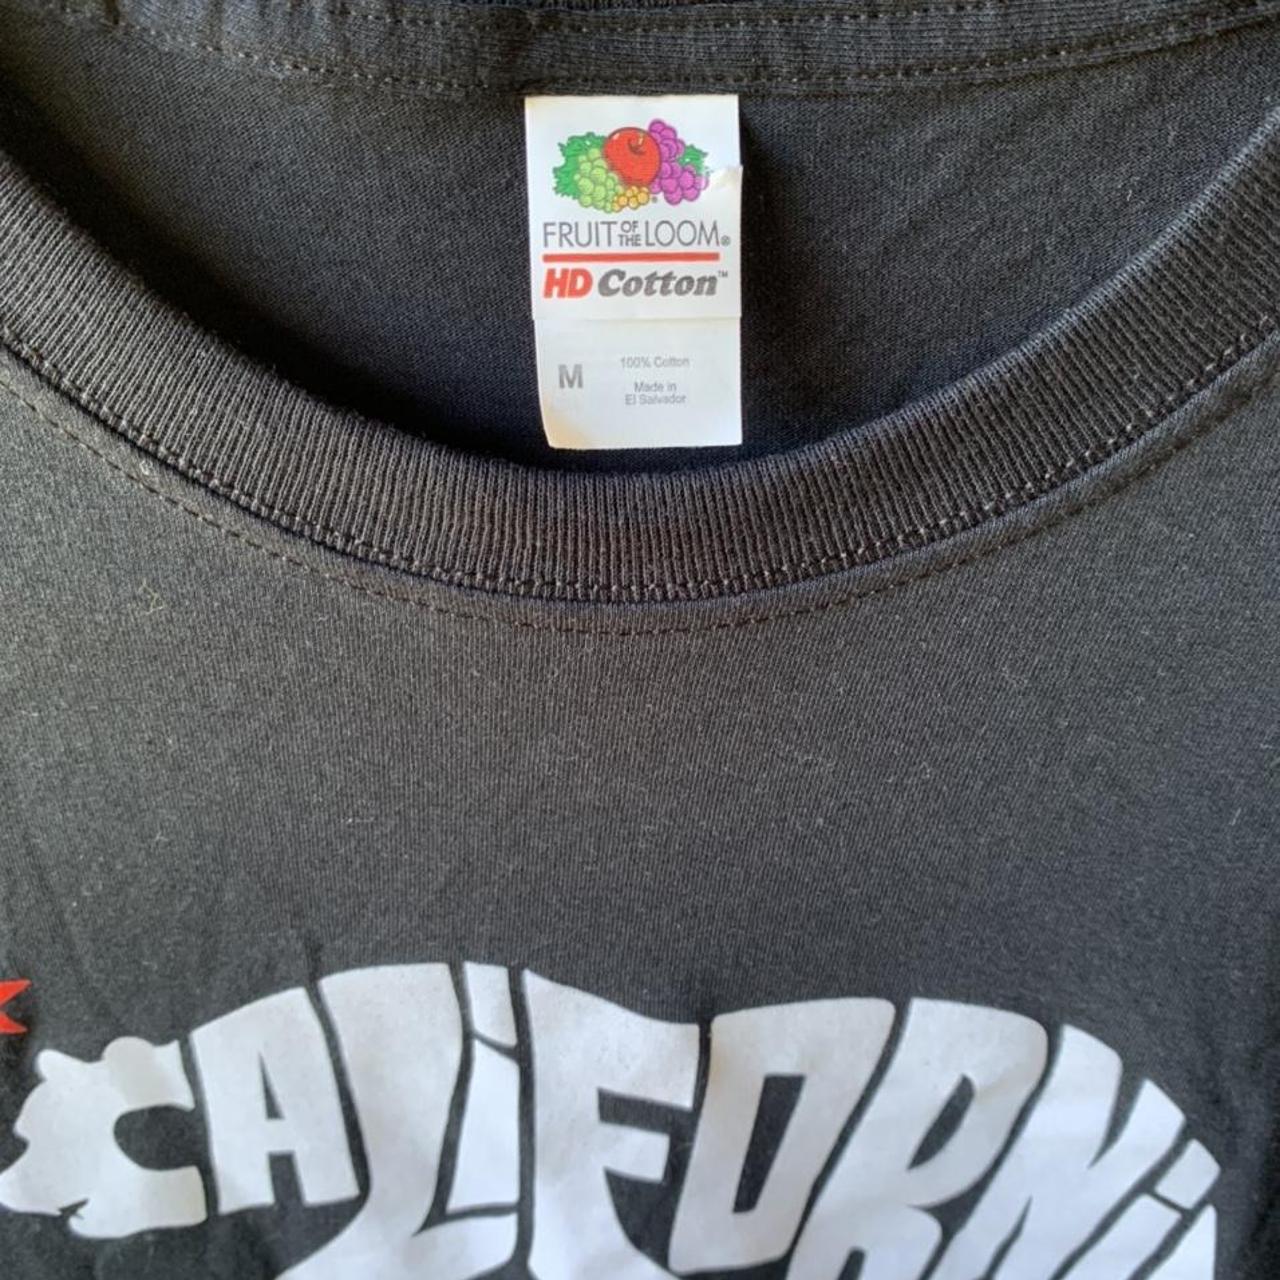 Product Image 3 - “California” Y2K 💥

All pieces are